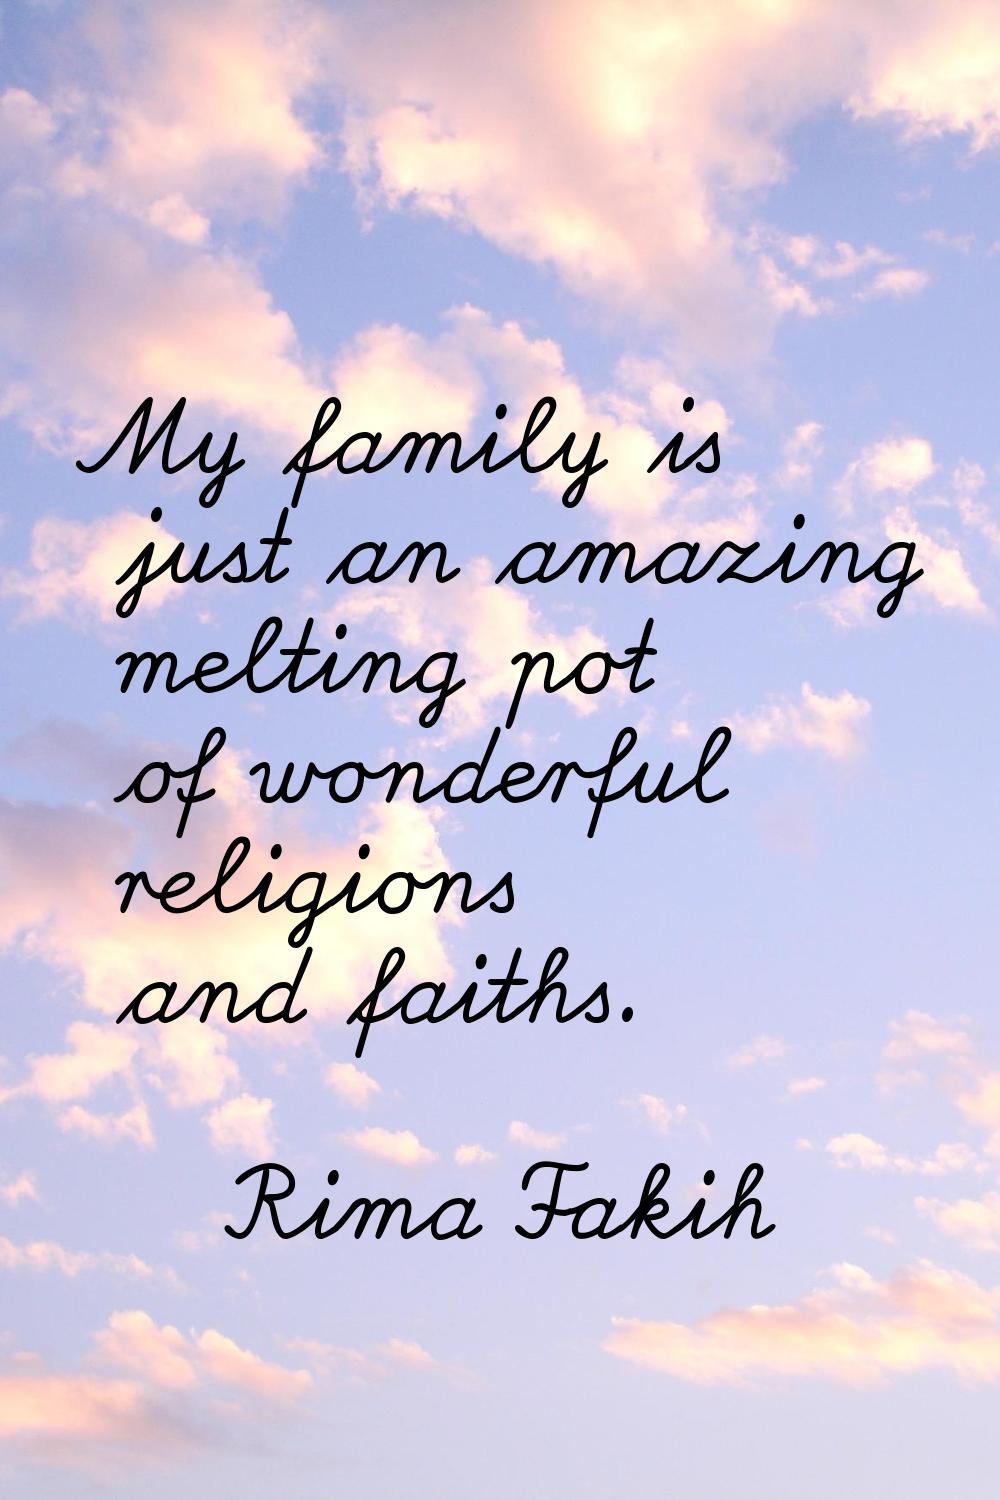 My family is just an amazing melting pot of wonderful religions and faiths.